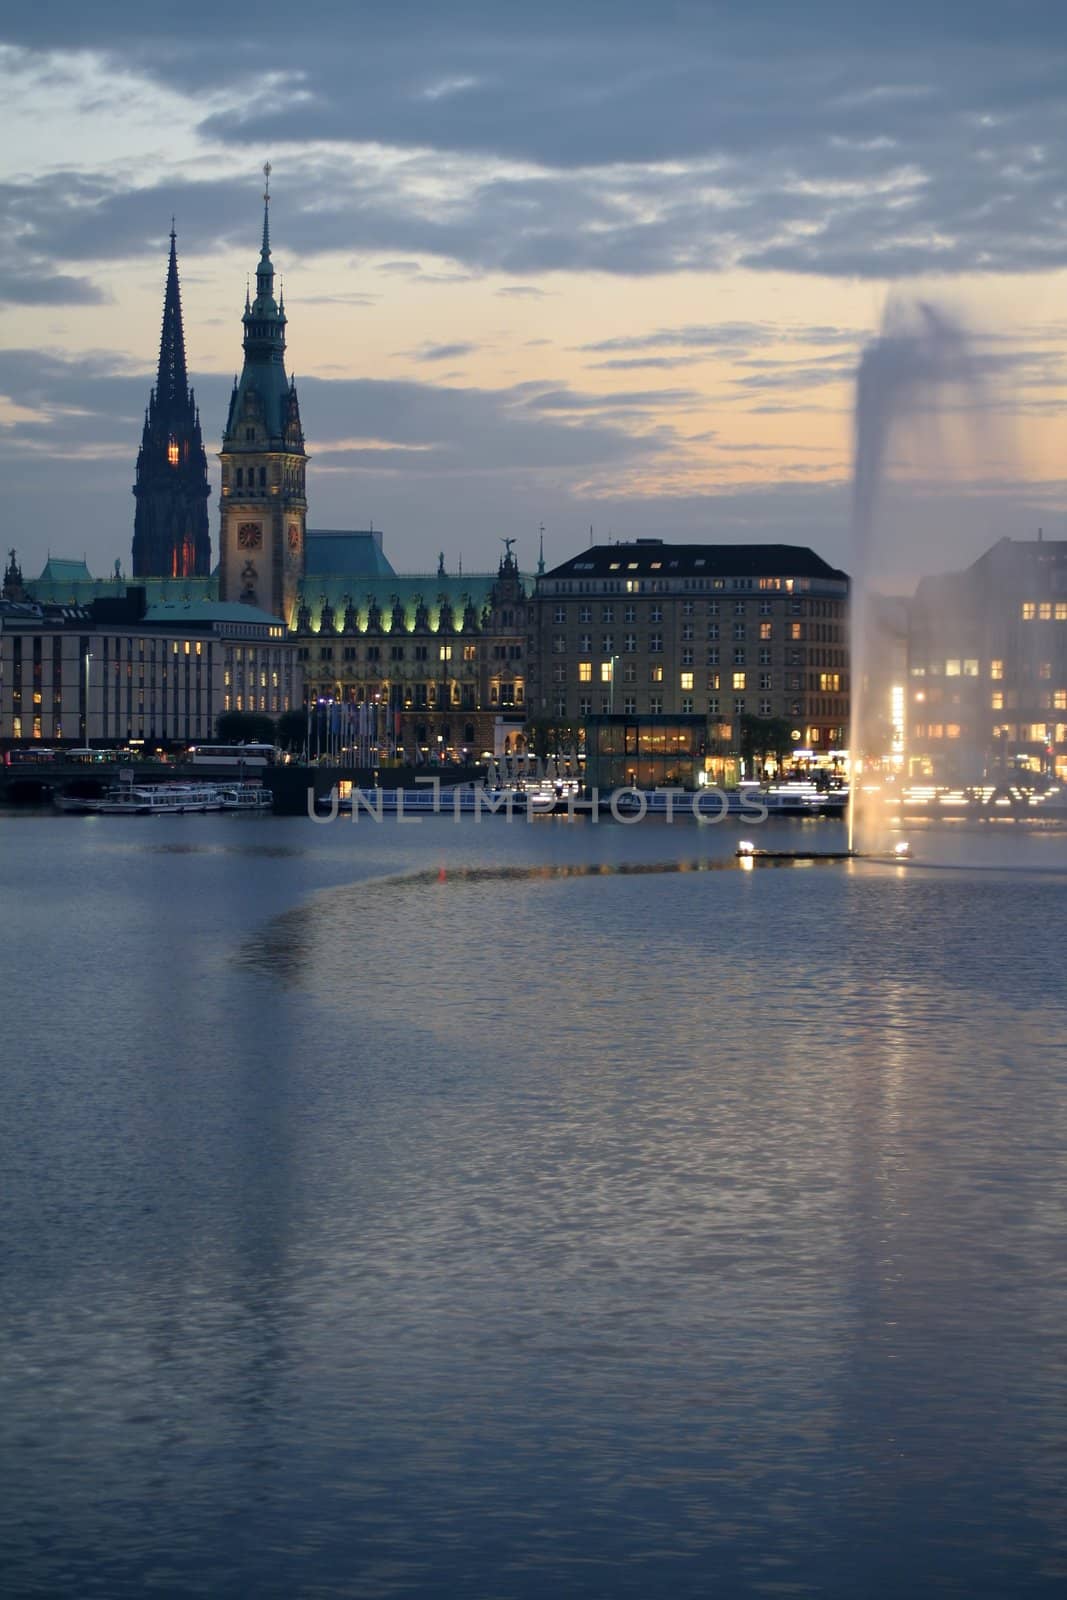 View across Hamburg's Alster lake at dusk, with illuminated water fountain. The skyline shows parts of the town hall and the Nikolai church.